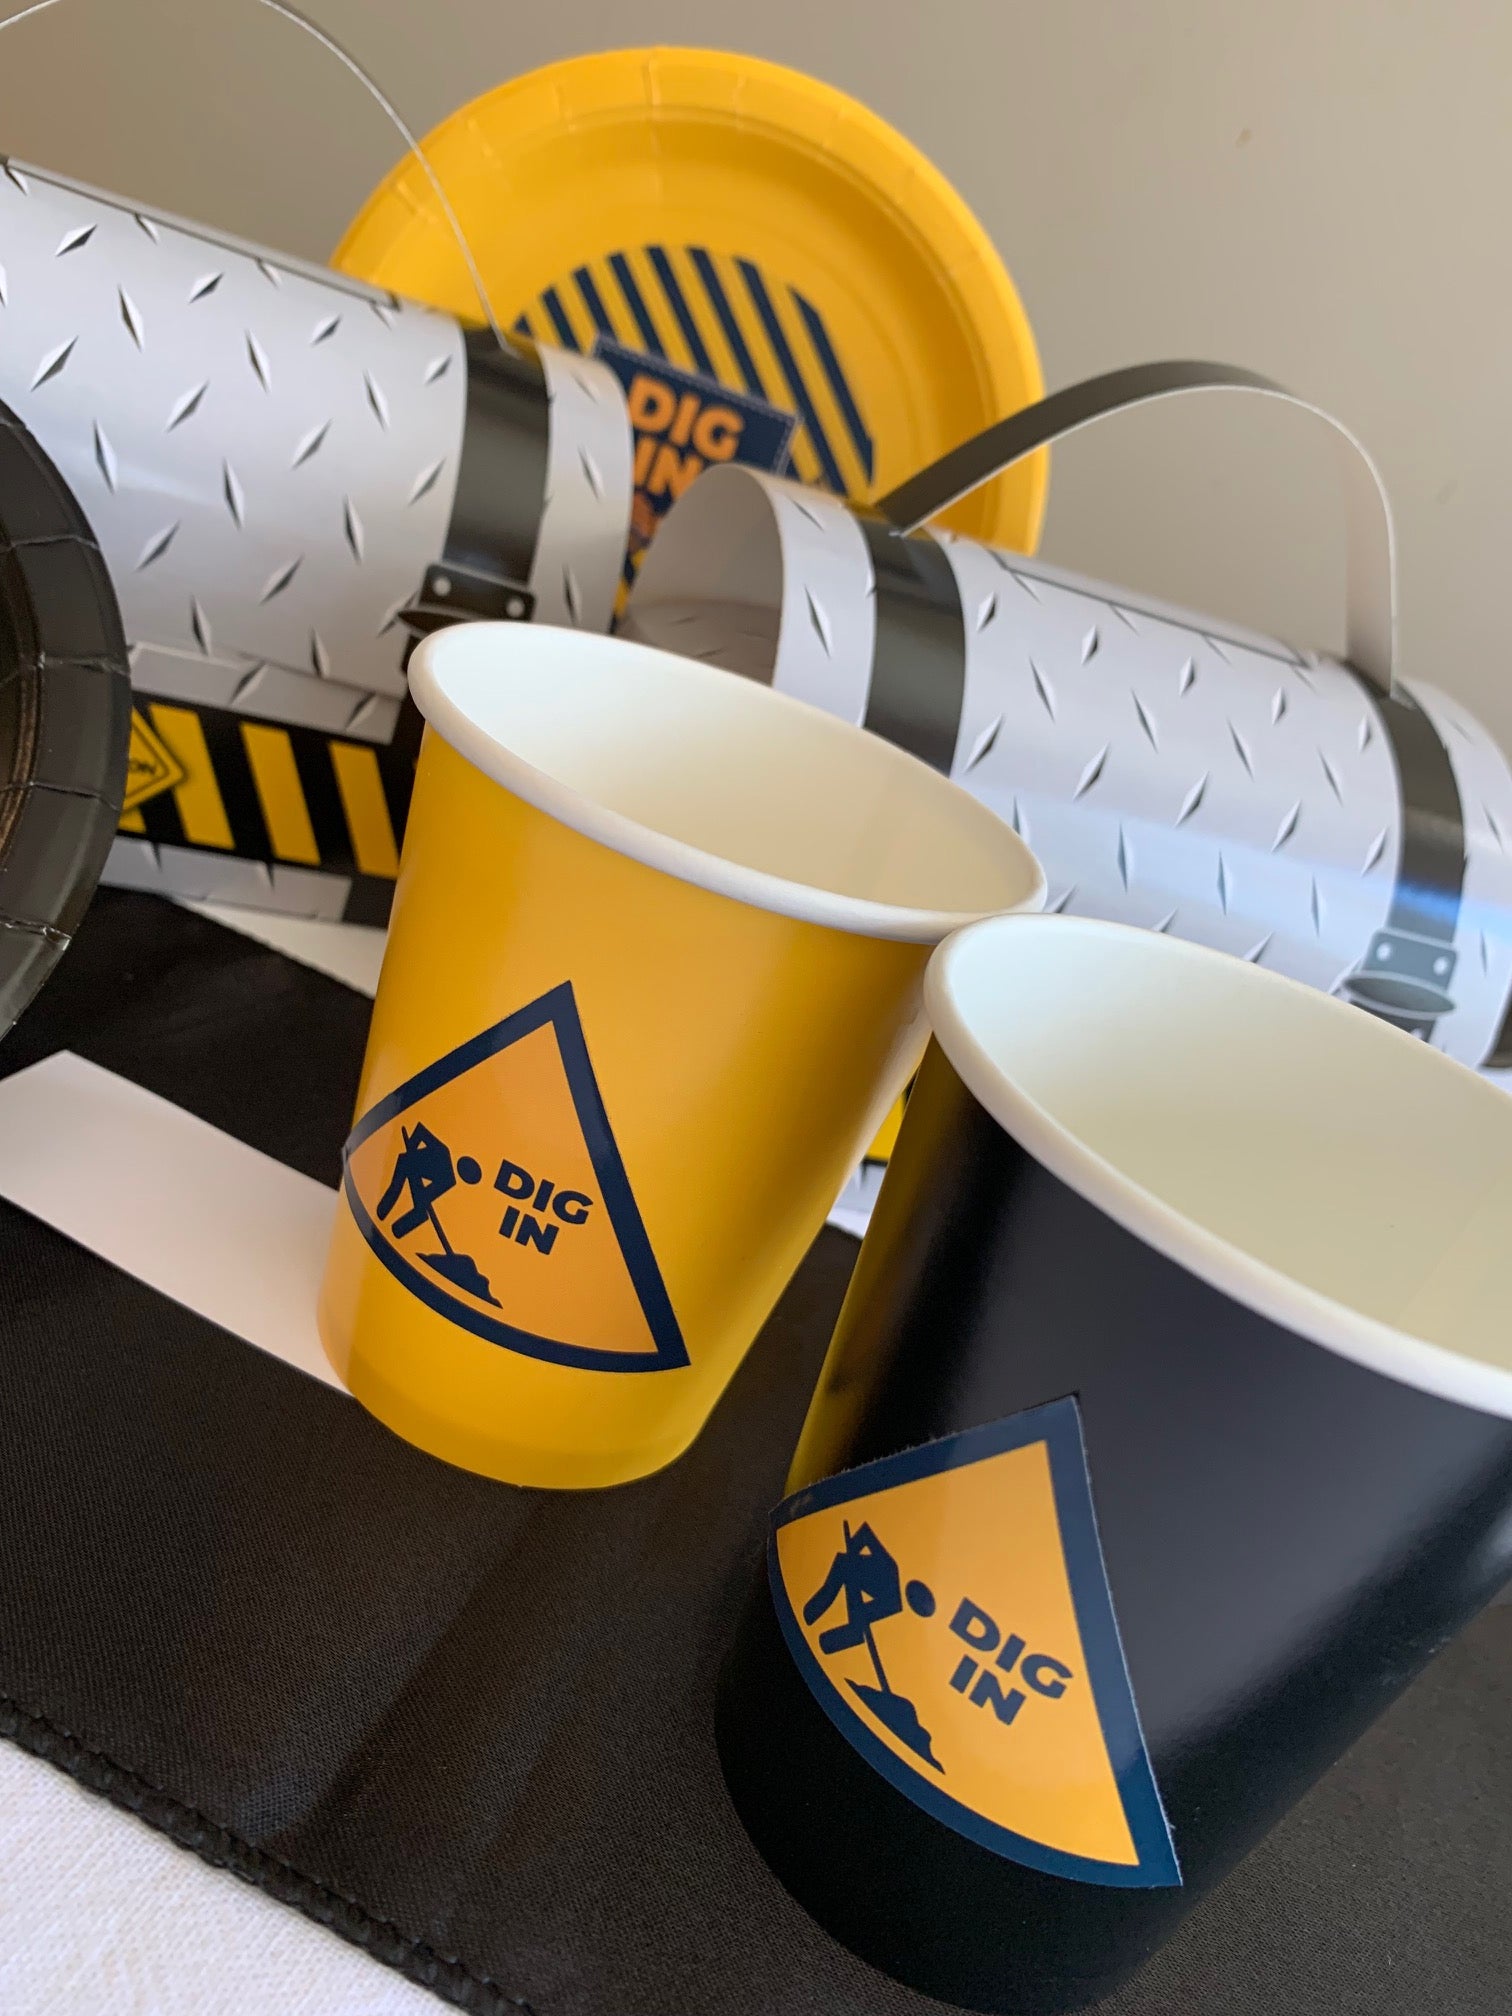 Construction party cups